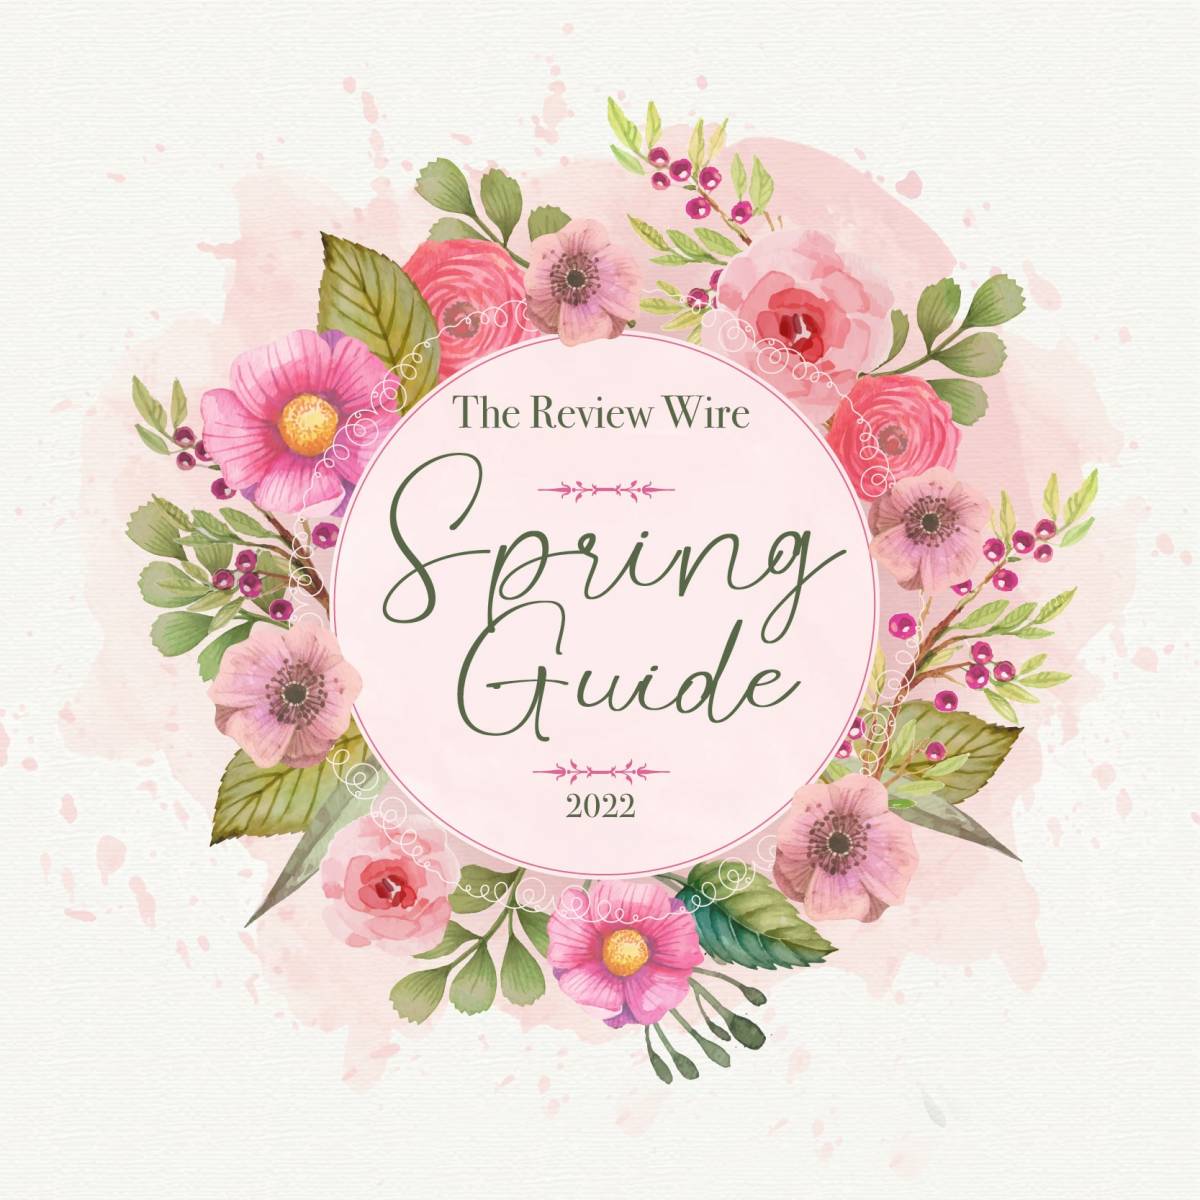 The Review Wire Spring Guide 2022